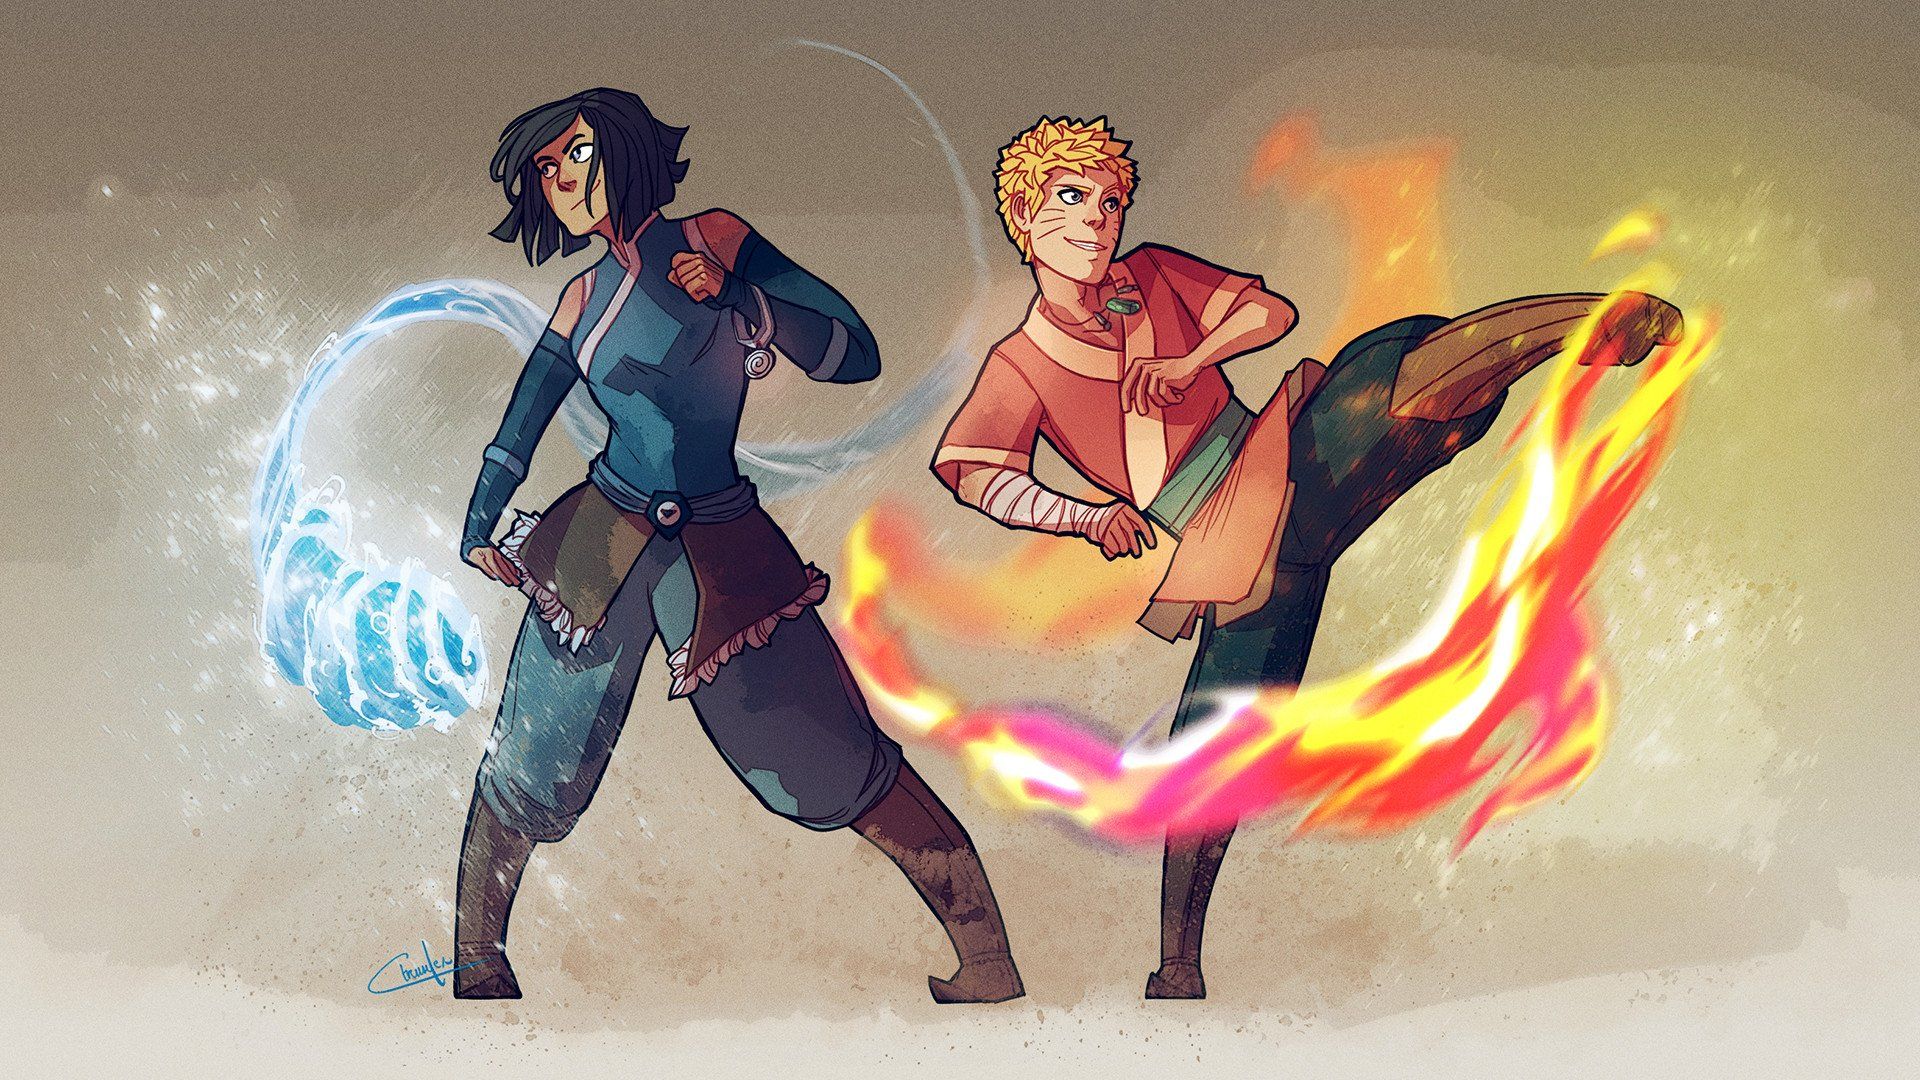 Korra and Naruto by ctreuse109 on Deviant Art